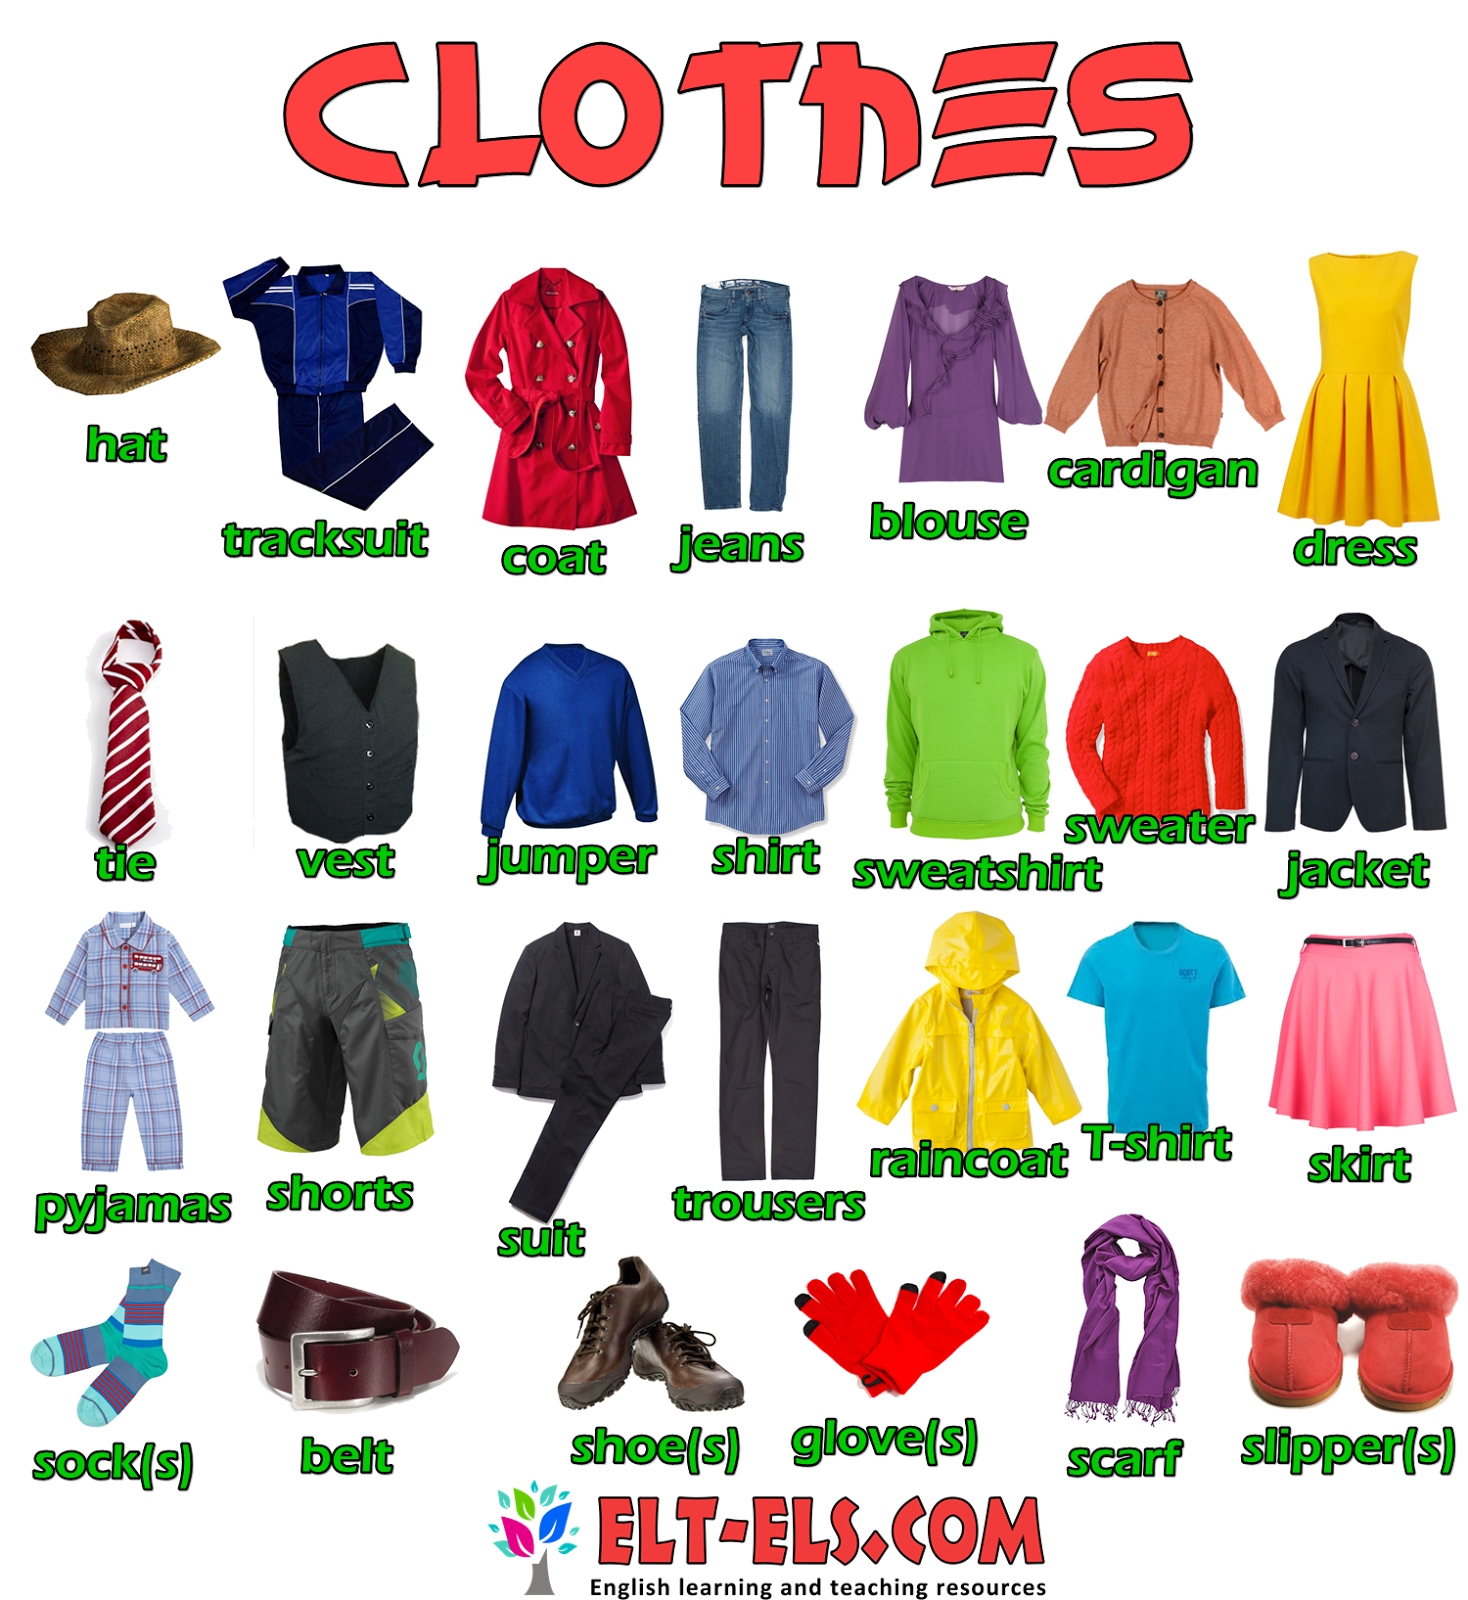 Clothes and Jewels » Your Home English Classroom - English is great